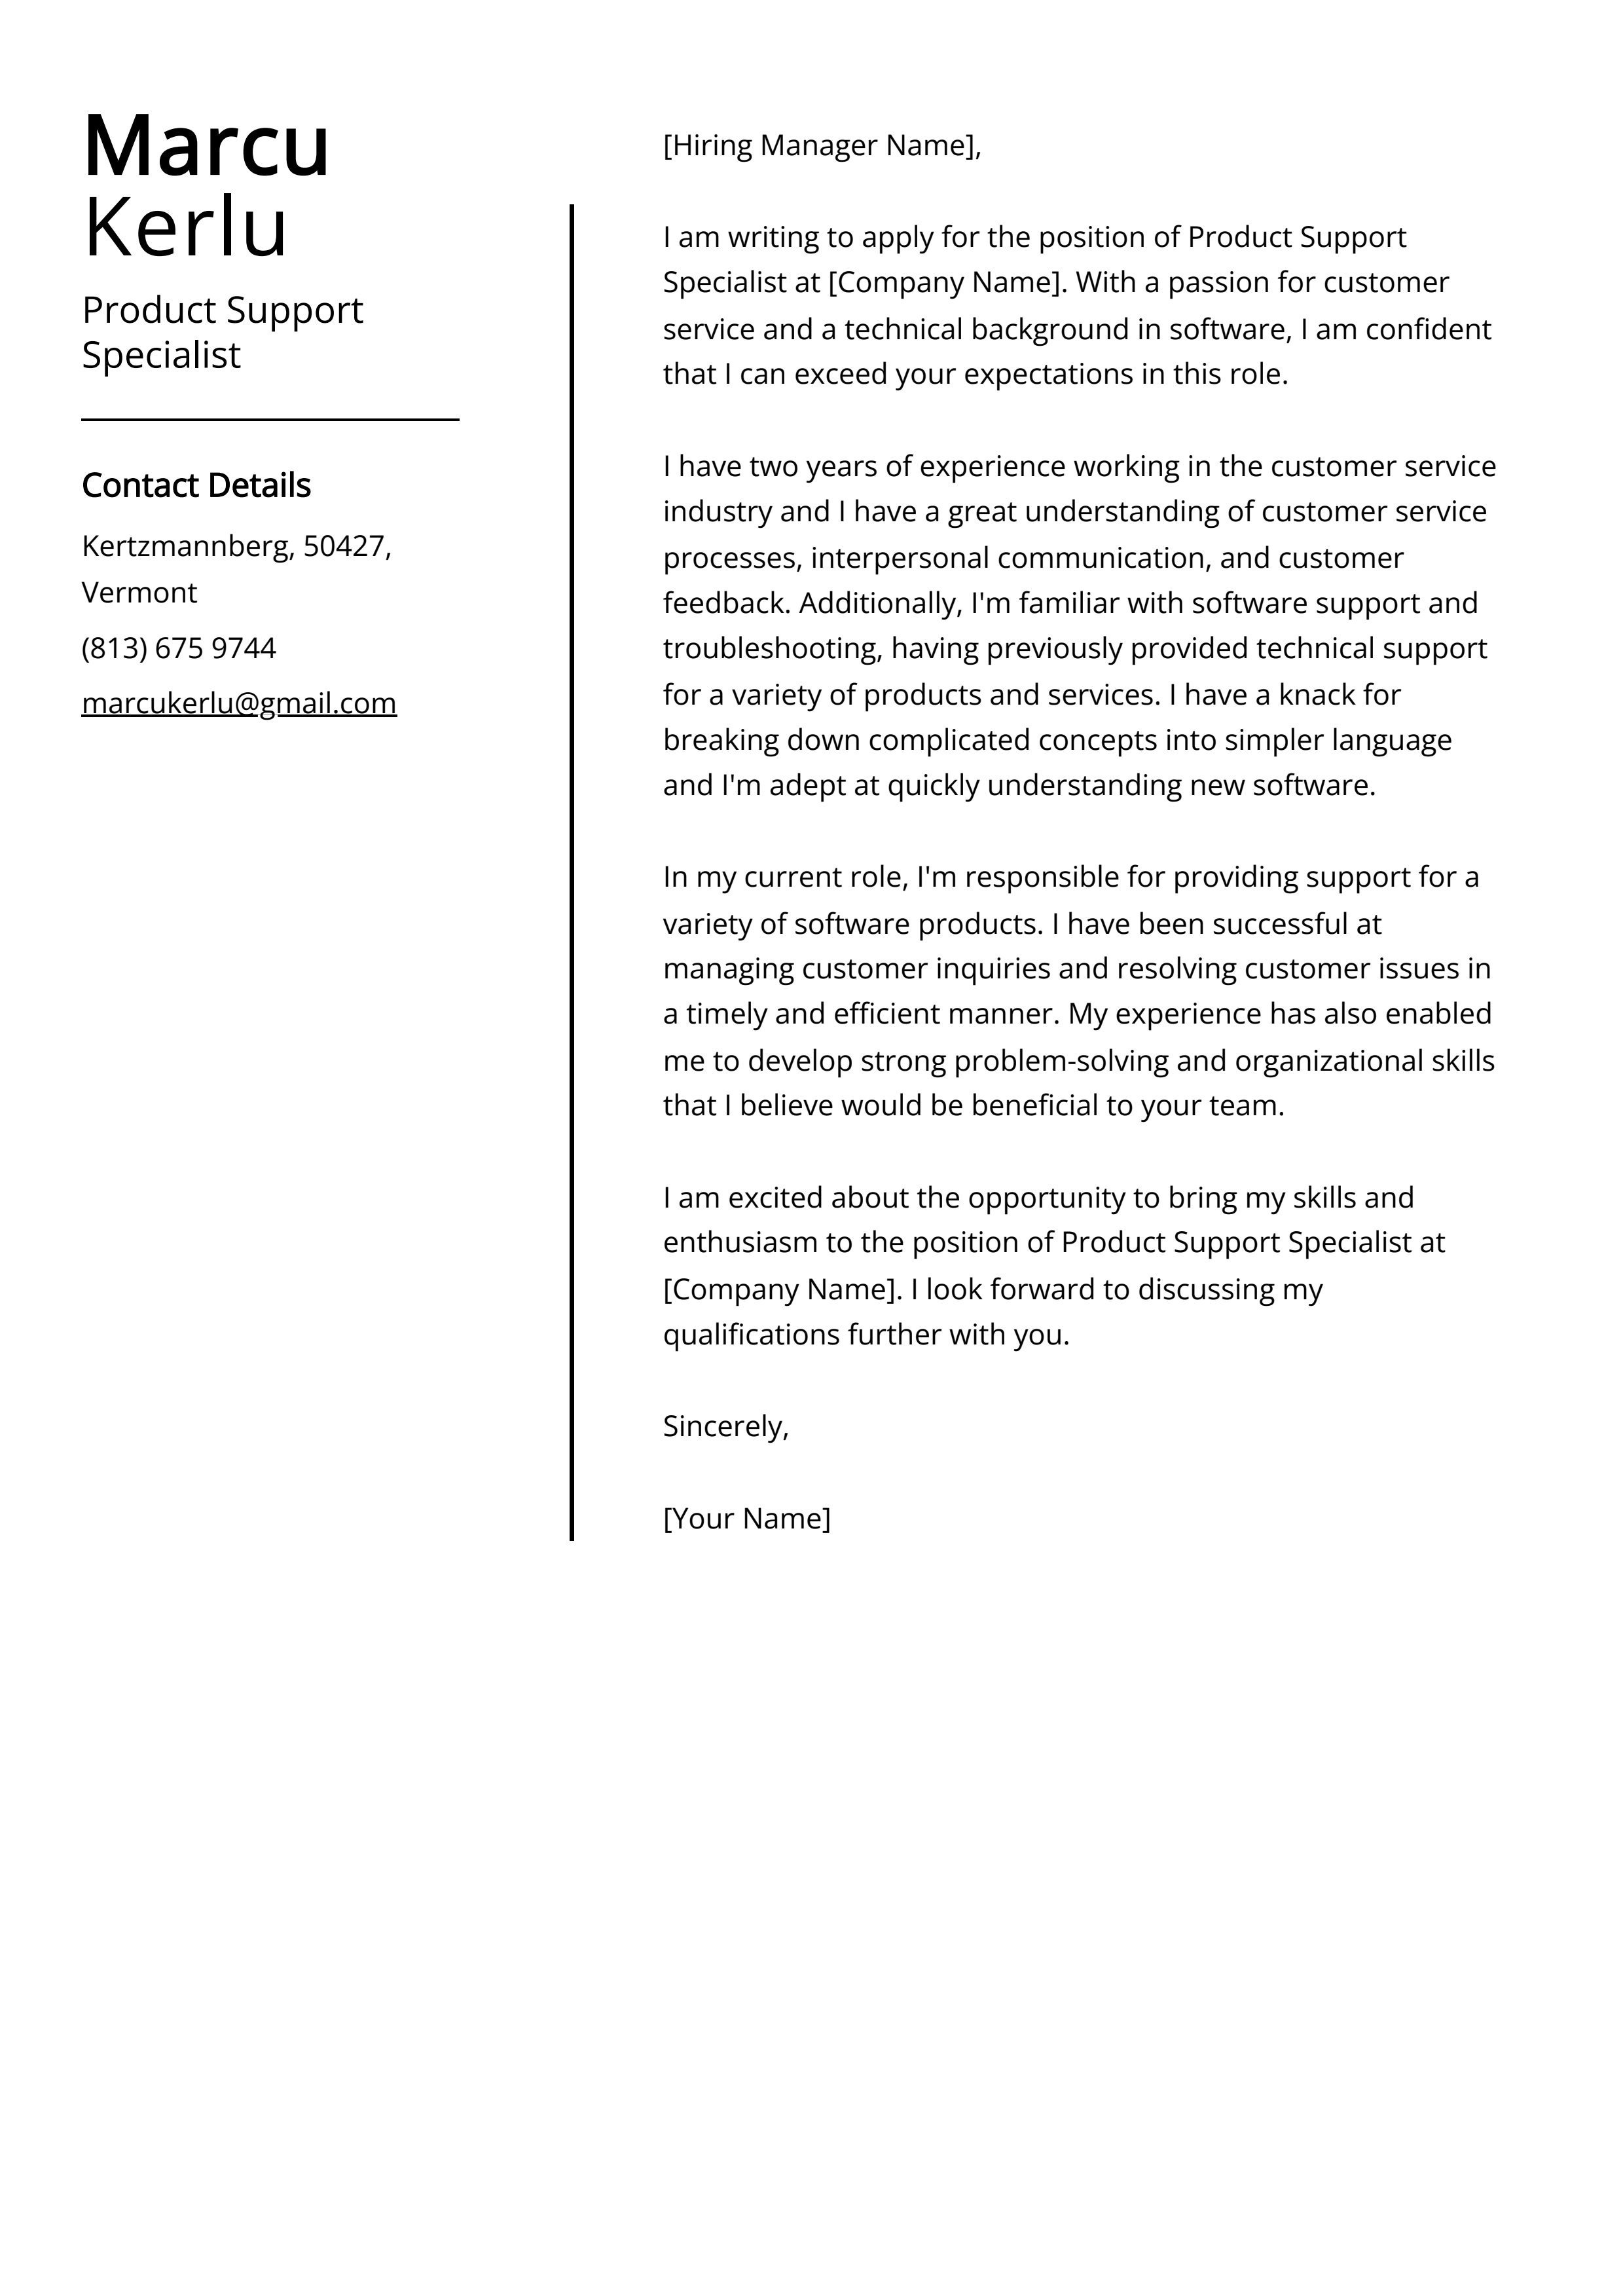 Product Support Specialist Cover Letter Example